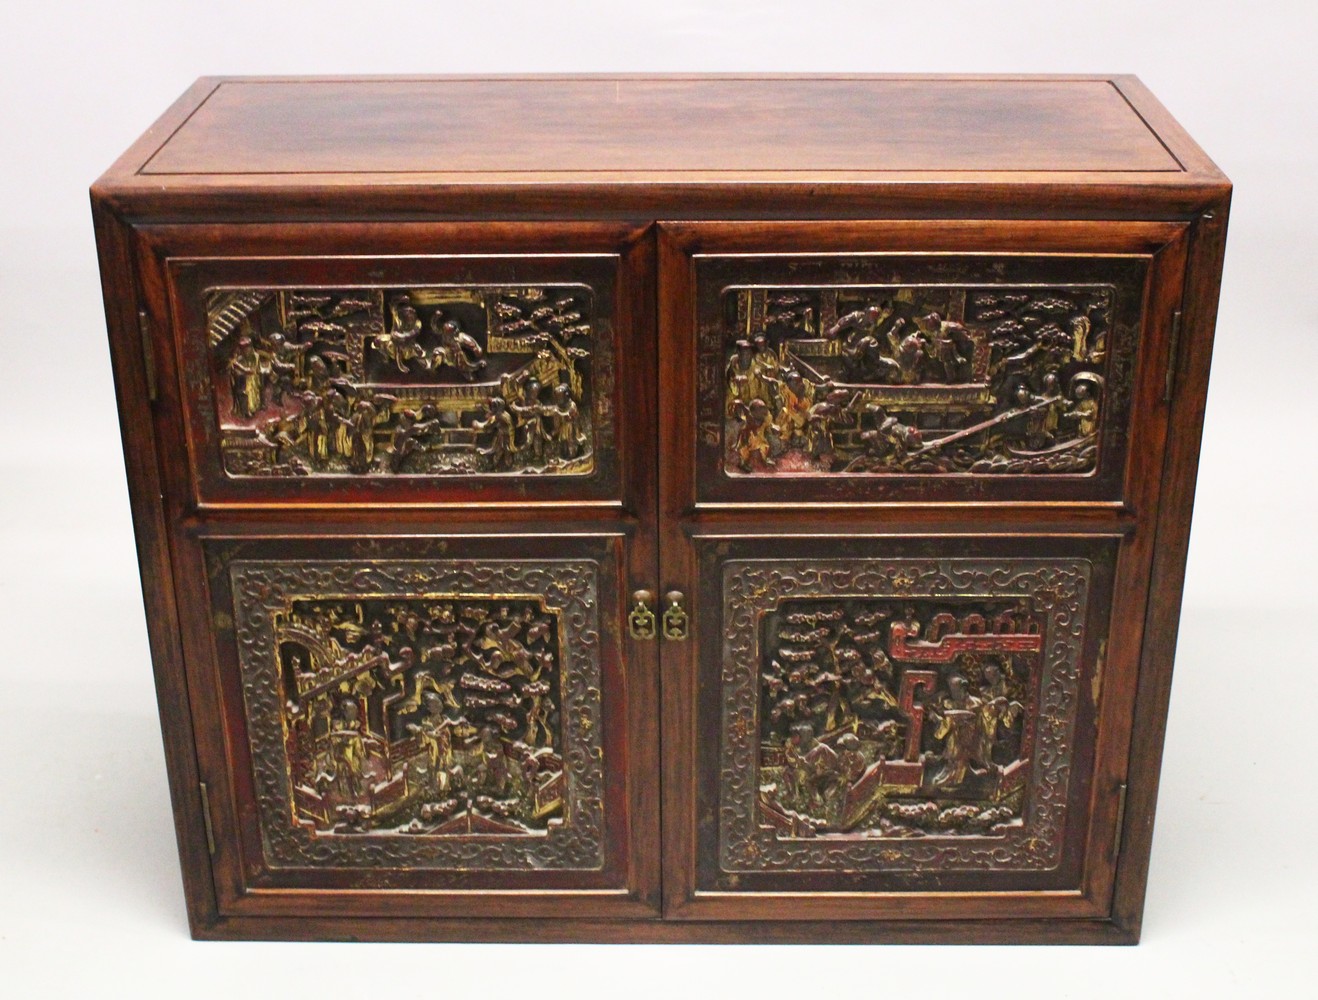 A GOOD 19TH CENTURY CHINESE HARDWOOD CABINET, the cabinet with two large carved and gilded doors,